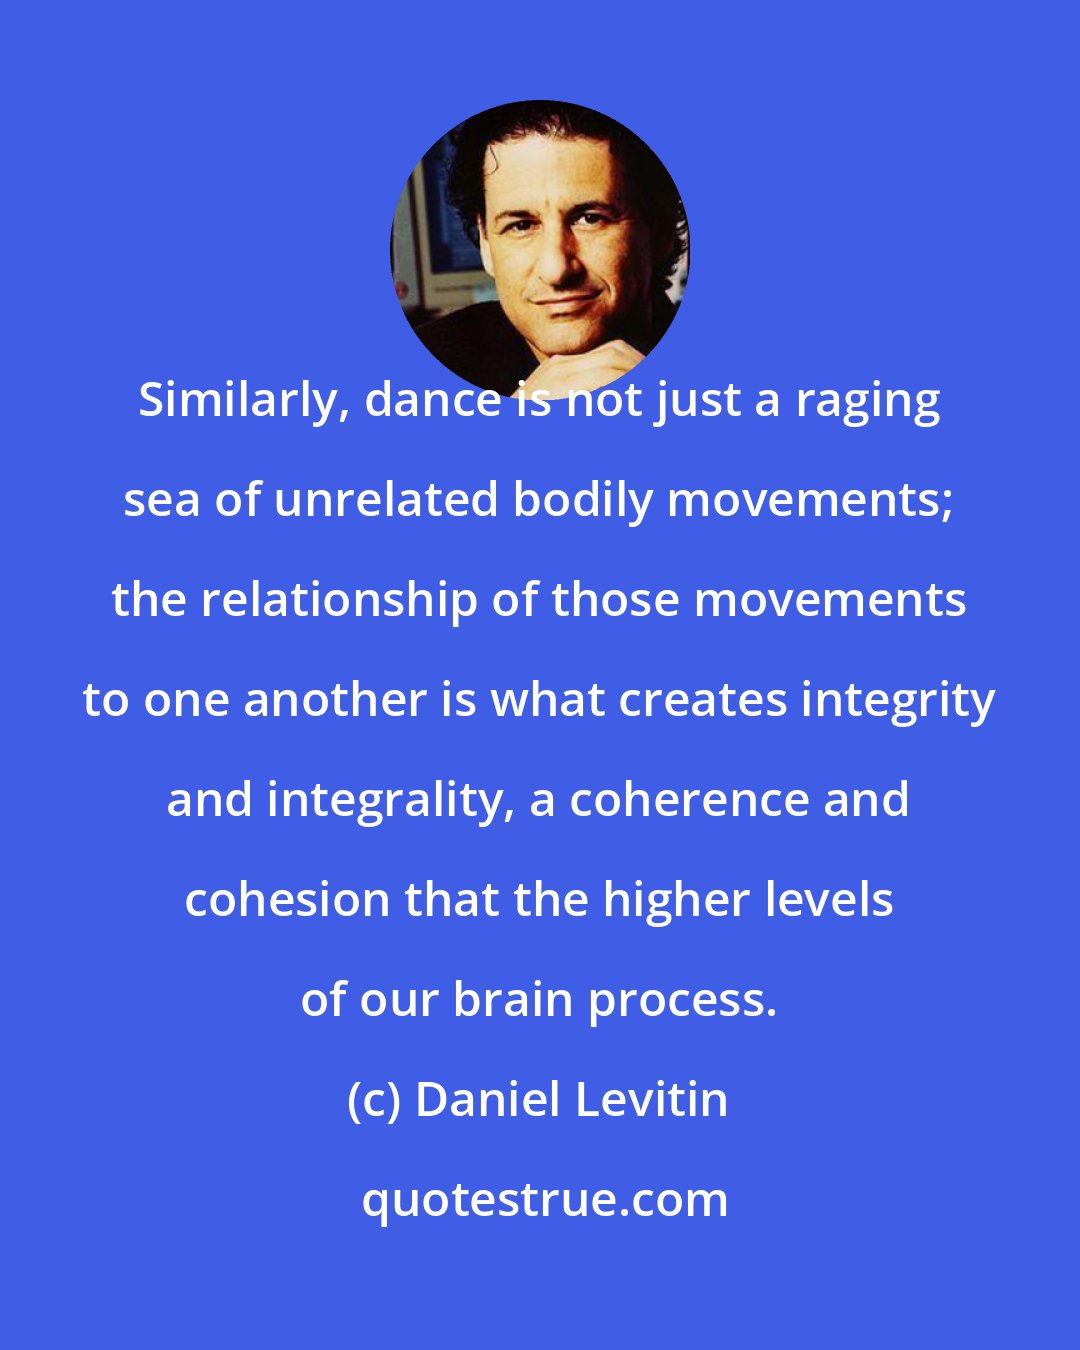 Daniel Levitin: Similarly, dance is not just a raging sea of unrelated bodily movements; the relationship of those movements to one another is what creates integrity and integrality, a coherence and cohesion that the higher levels of our brain process.